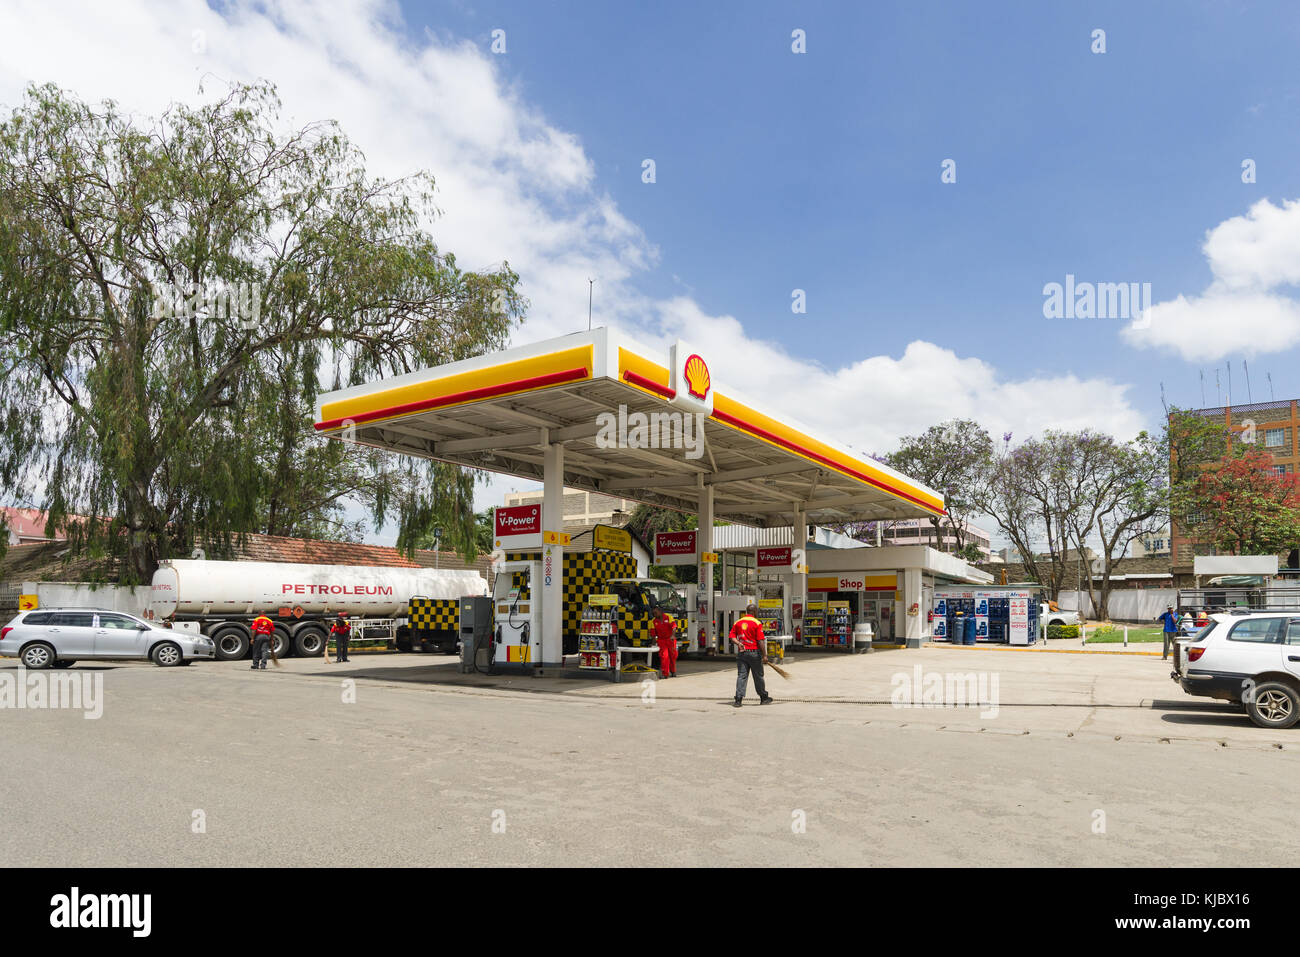 A Shell petrol station with attendants and customers at the fuel pumps, Kenya, East Africa Stock Photo